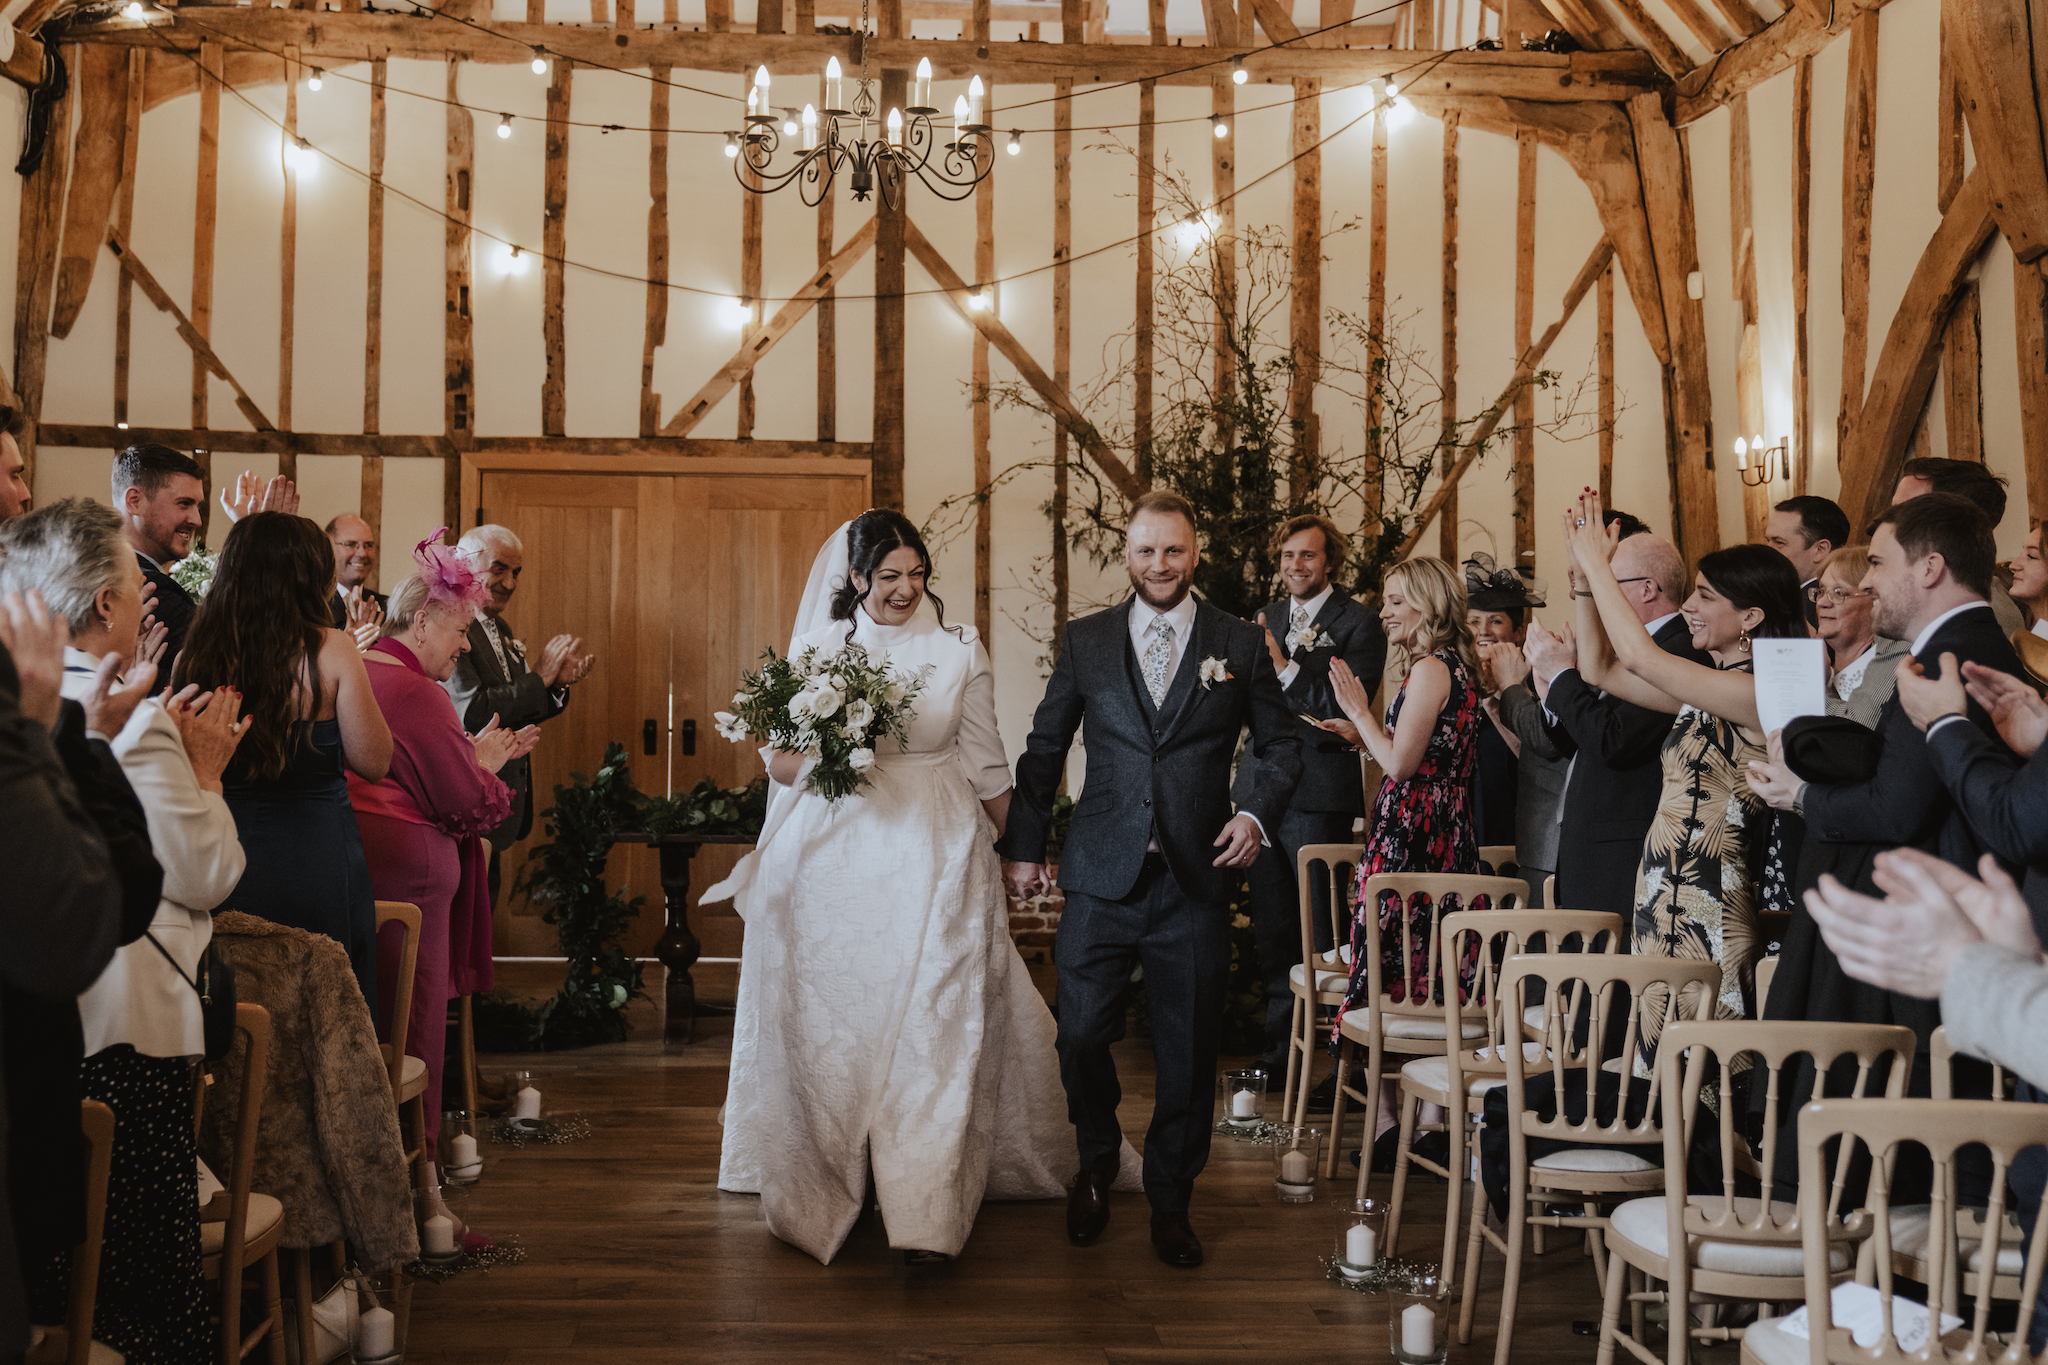 The ceremony barn at Bruisyard Country Estate, Suffolk